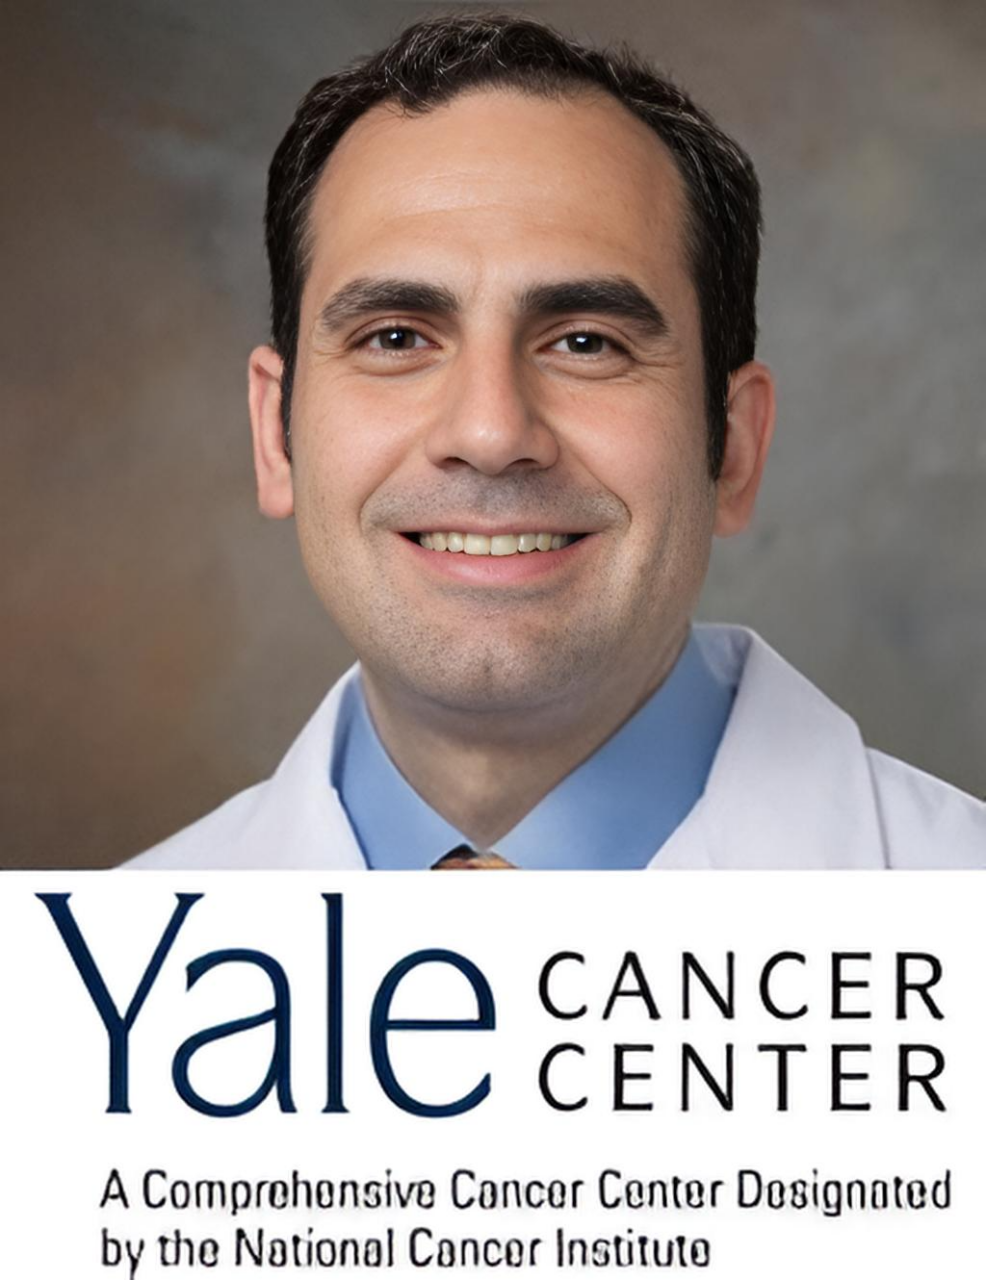 Amer Zeidan was appointed as the inaugural Chief of the Division of Hematologic Malignancies at Yale Cancer Center